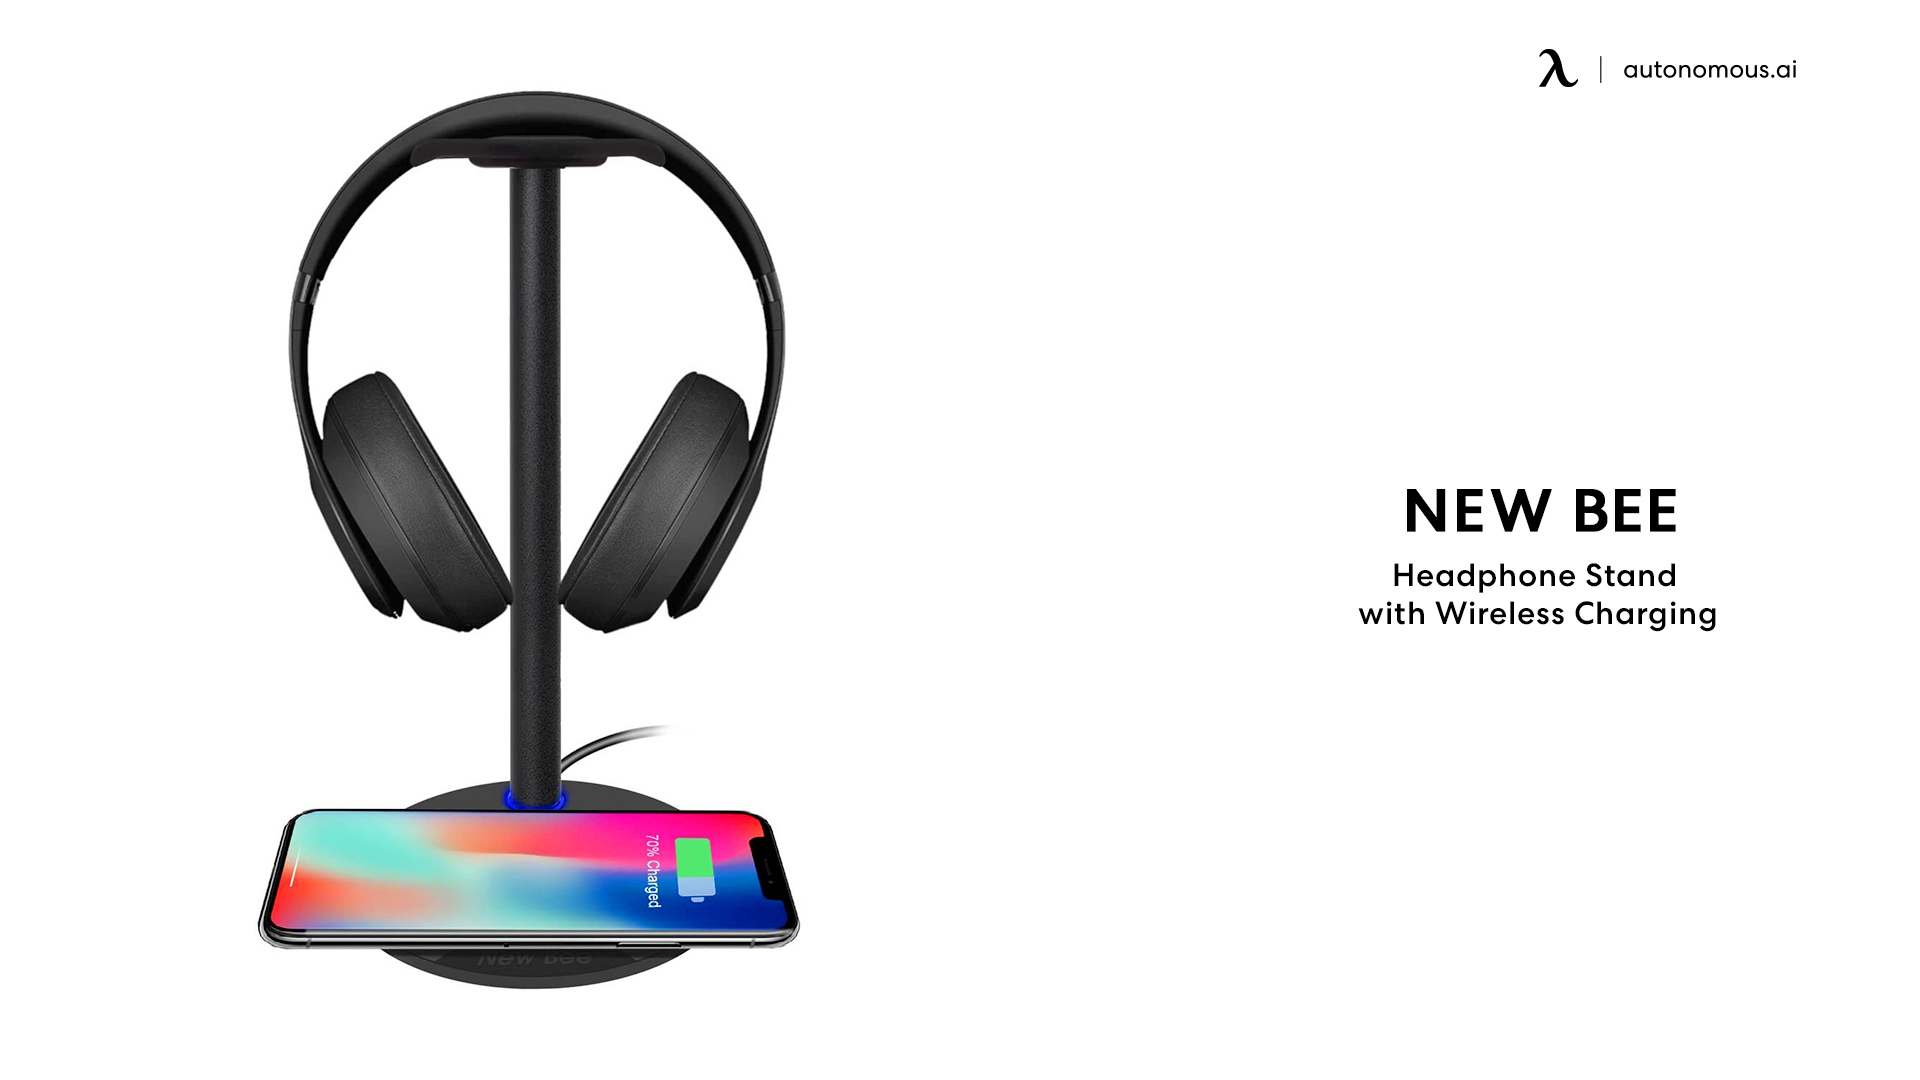 New Bee Headphone Stand with Wireless Charging